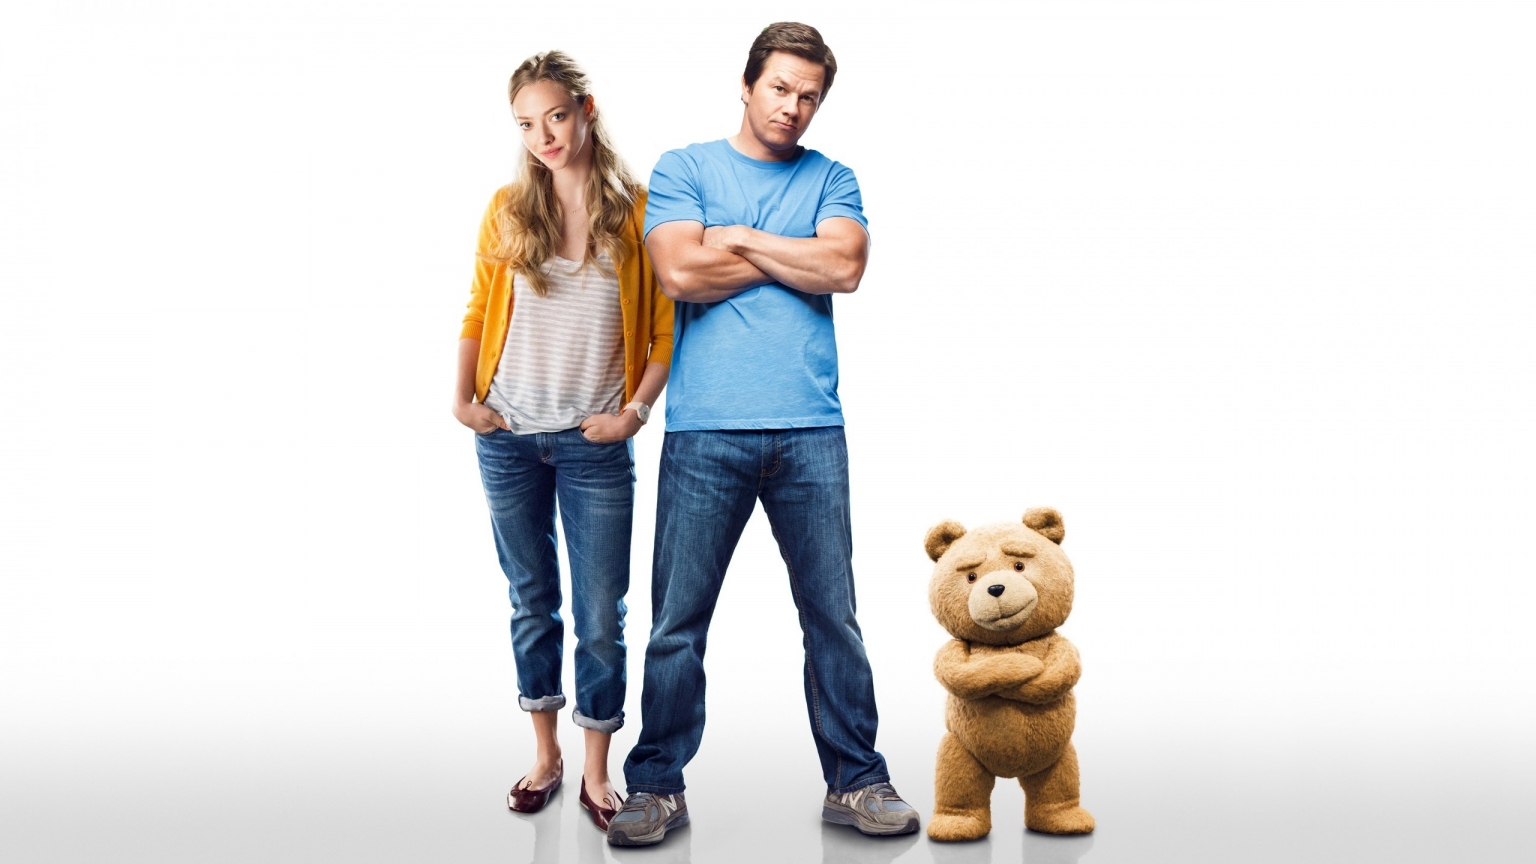 Ted 2 for 1536 x 864 HDTV resolution